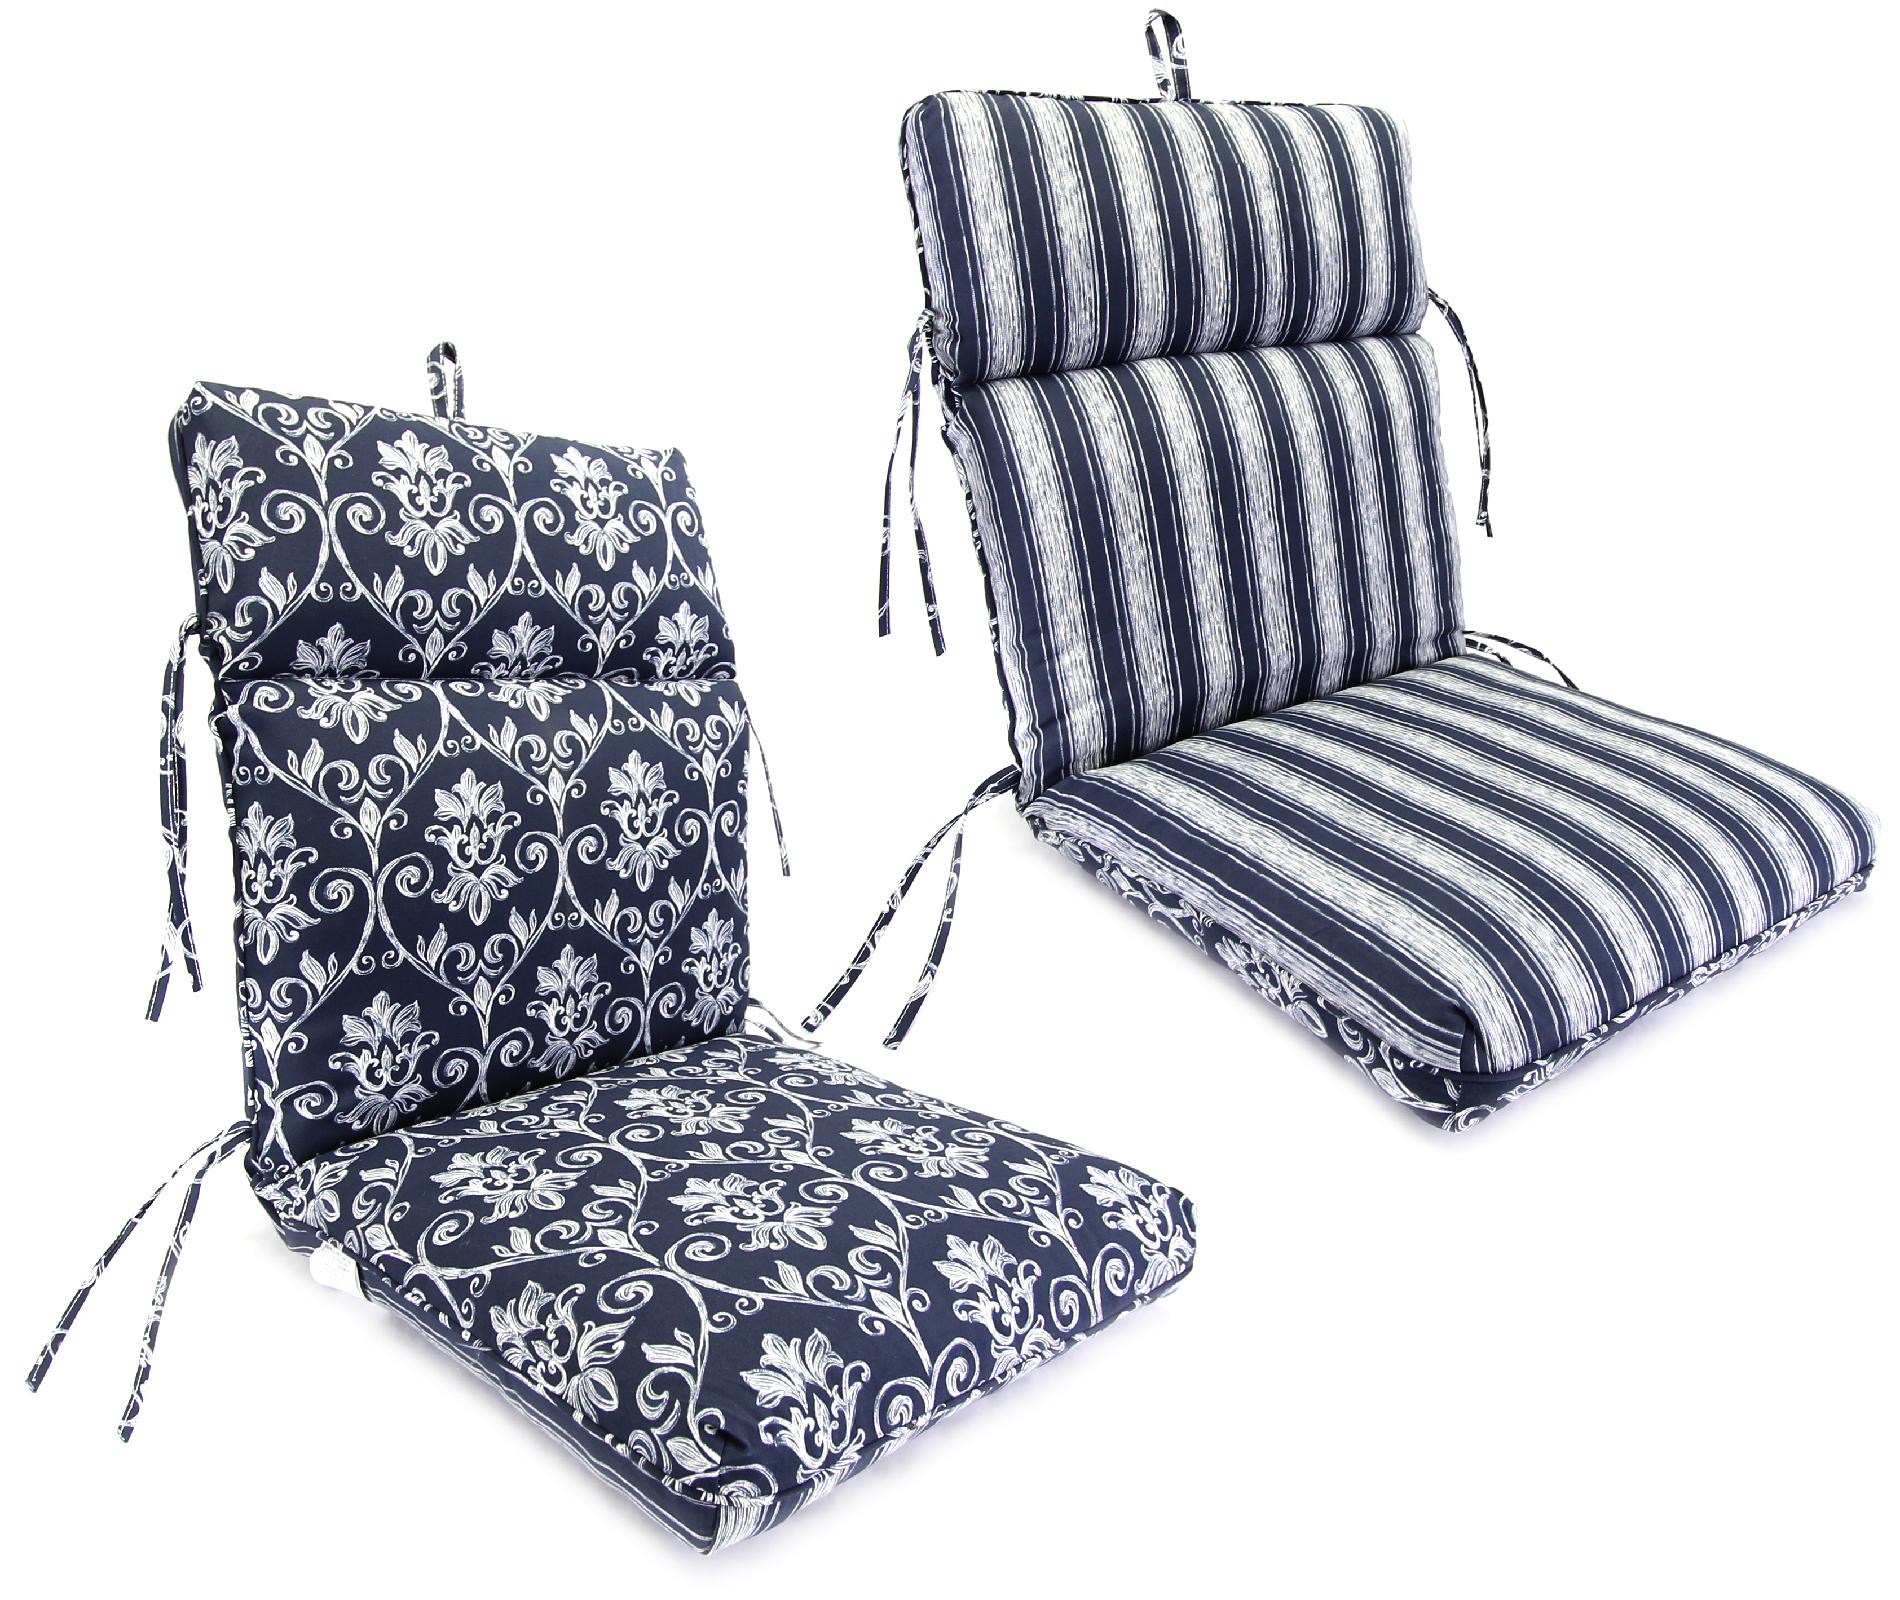 Patio Chair Cushions: Get Replacement Cushions at Sears